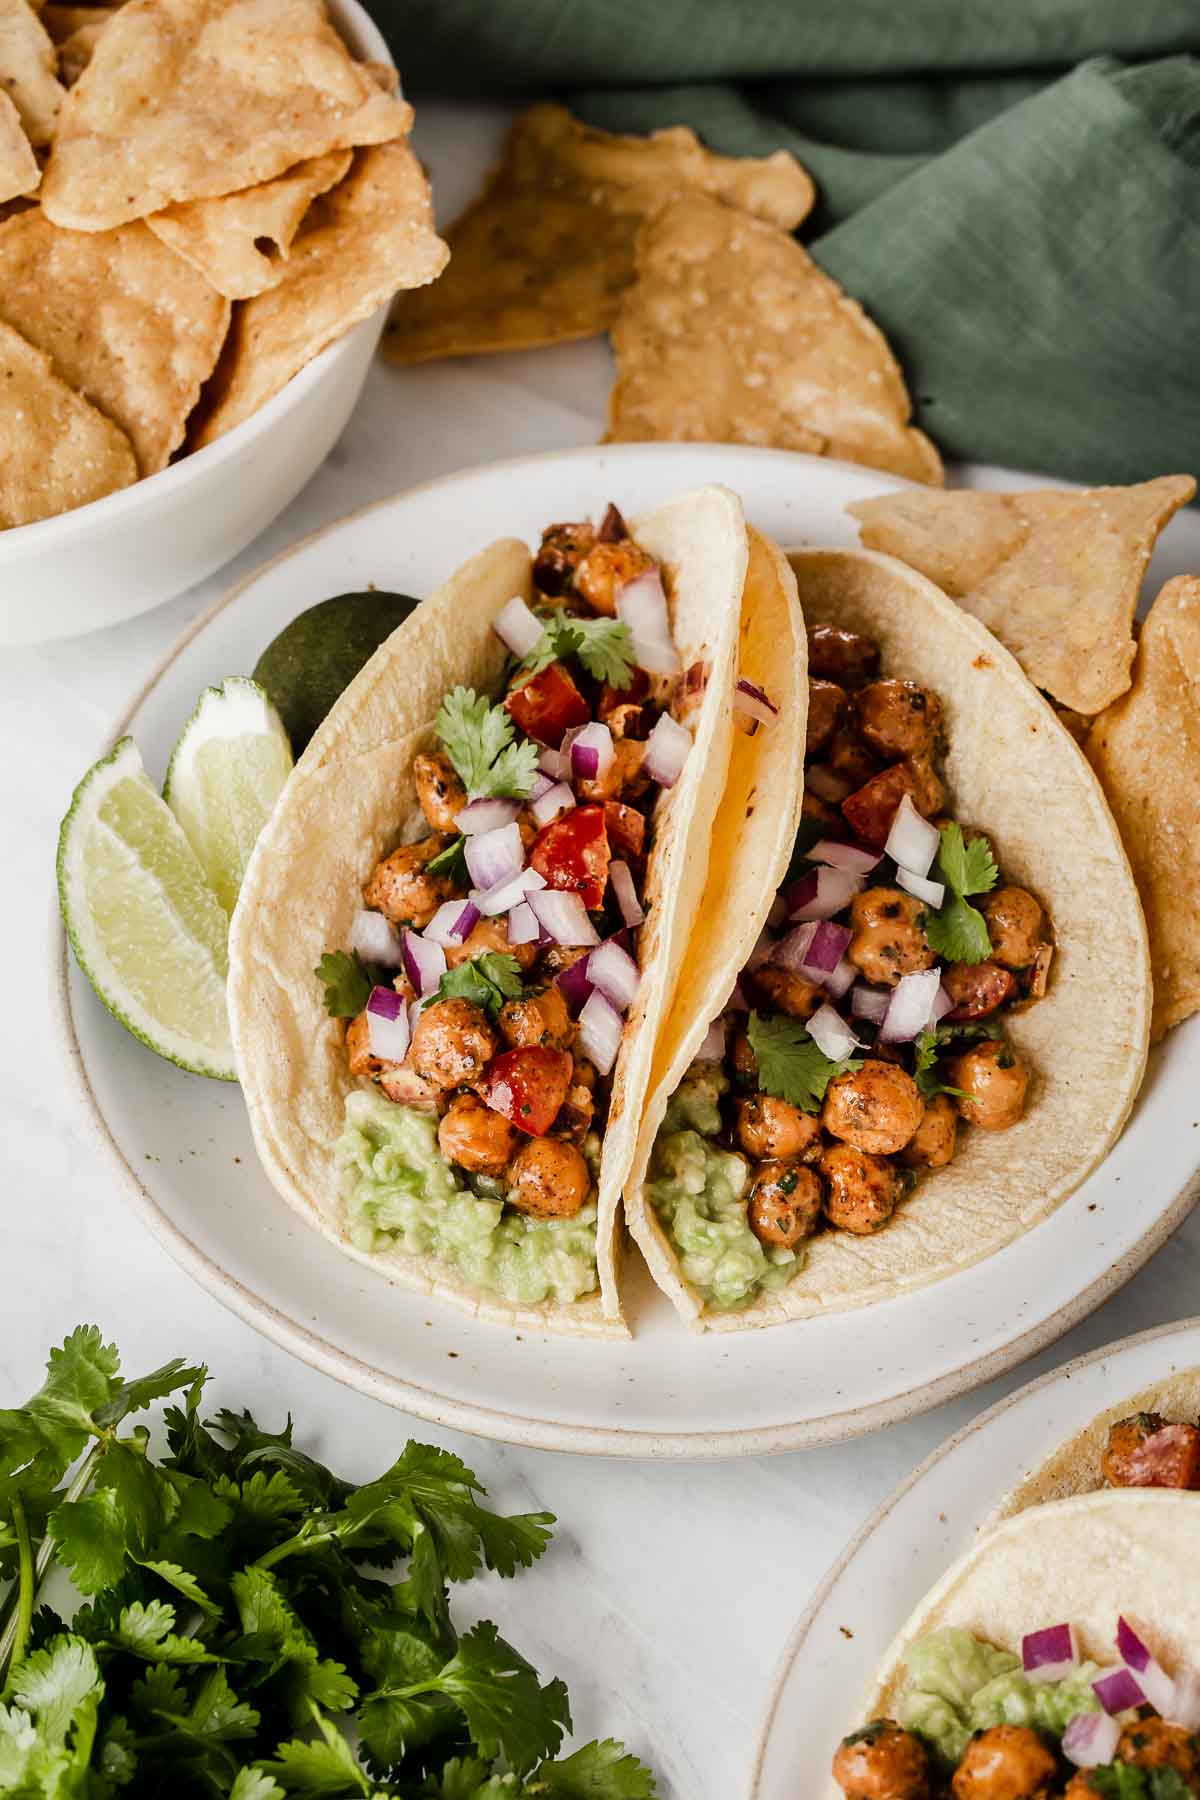 Two chickpea tacos side by side on plate with sliced lime on side.